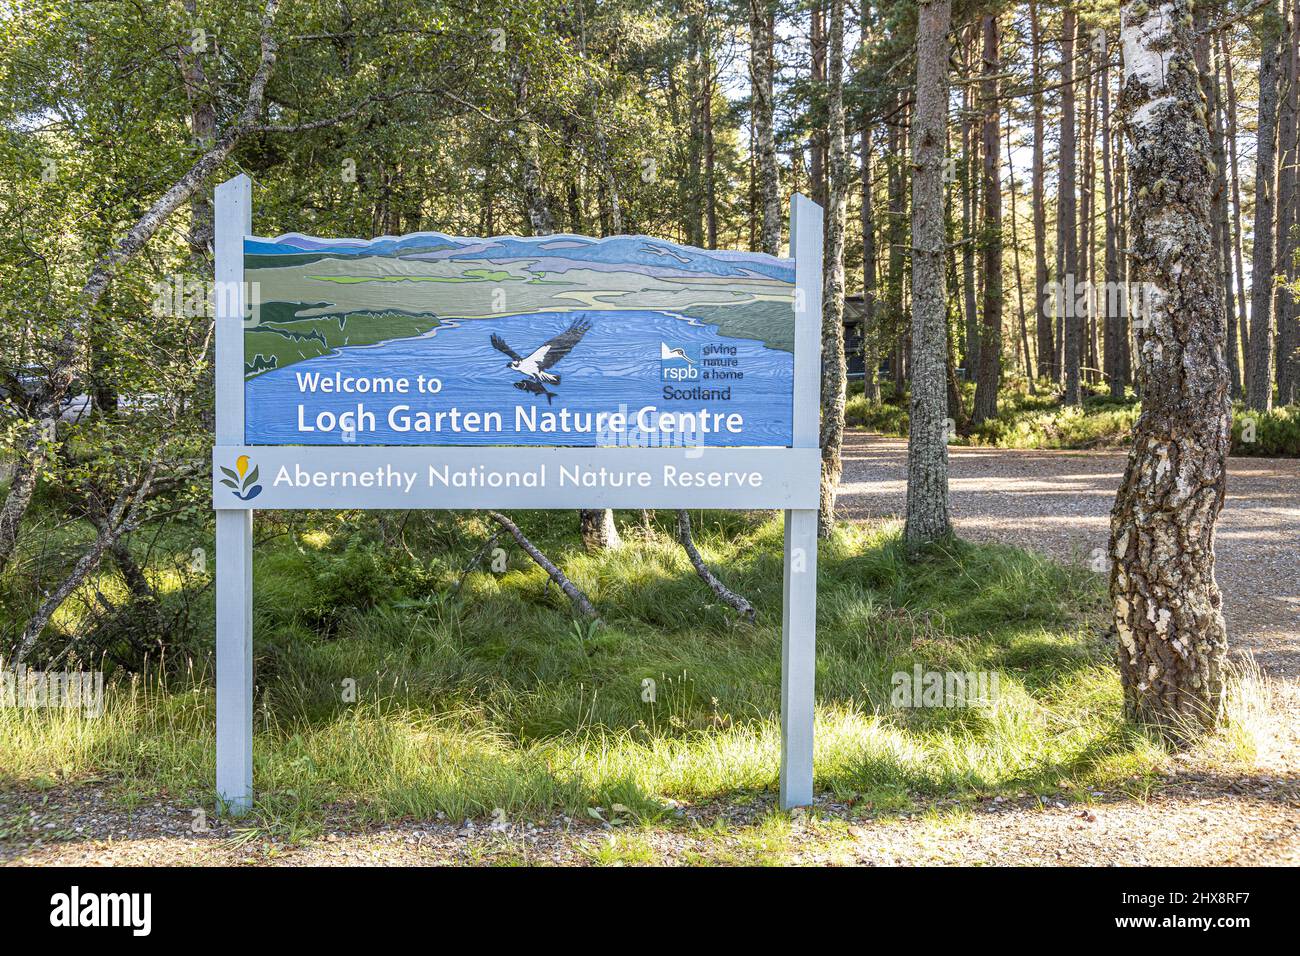 Welcome sign to the RSPB Loch Garten Nature Centre in the Abernethy National Nature Reserve,  Highland, Scotland UK. Stock Photo